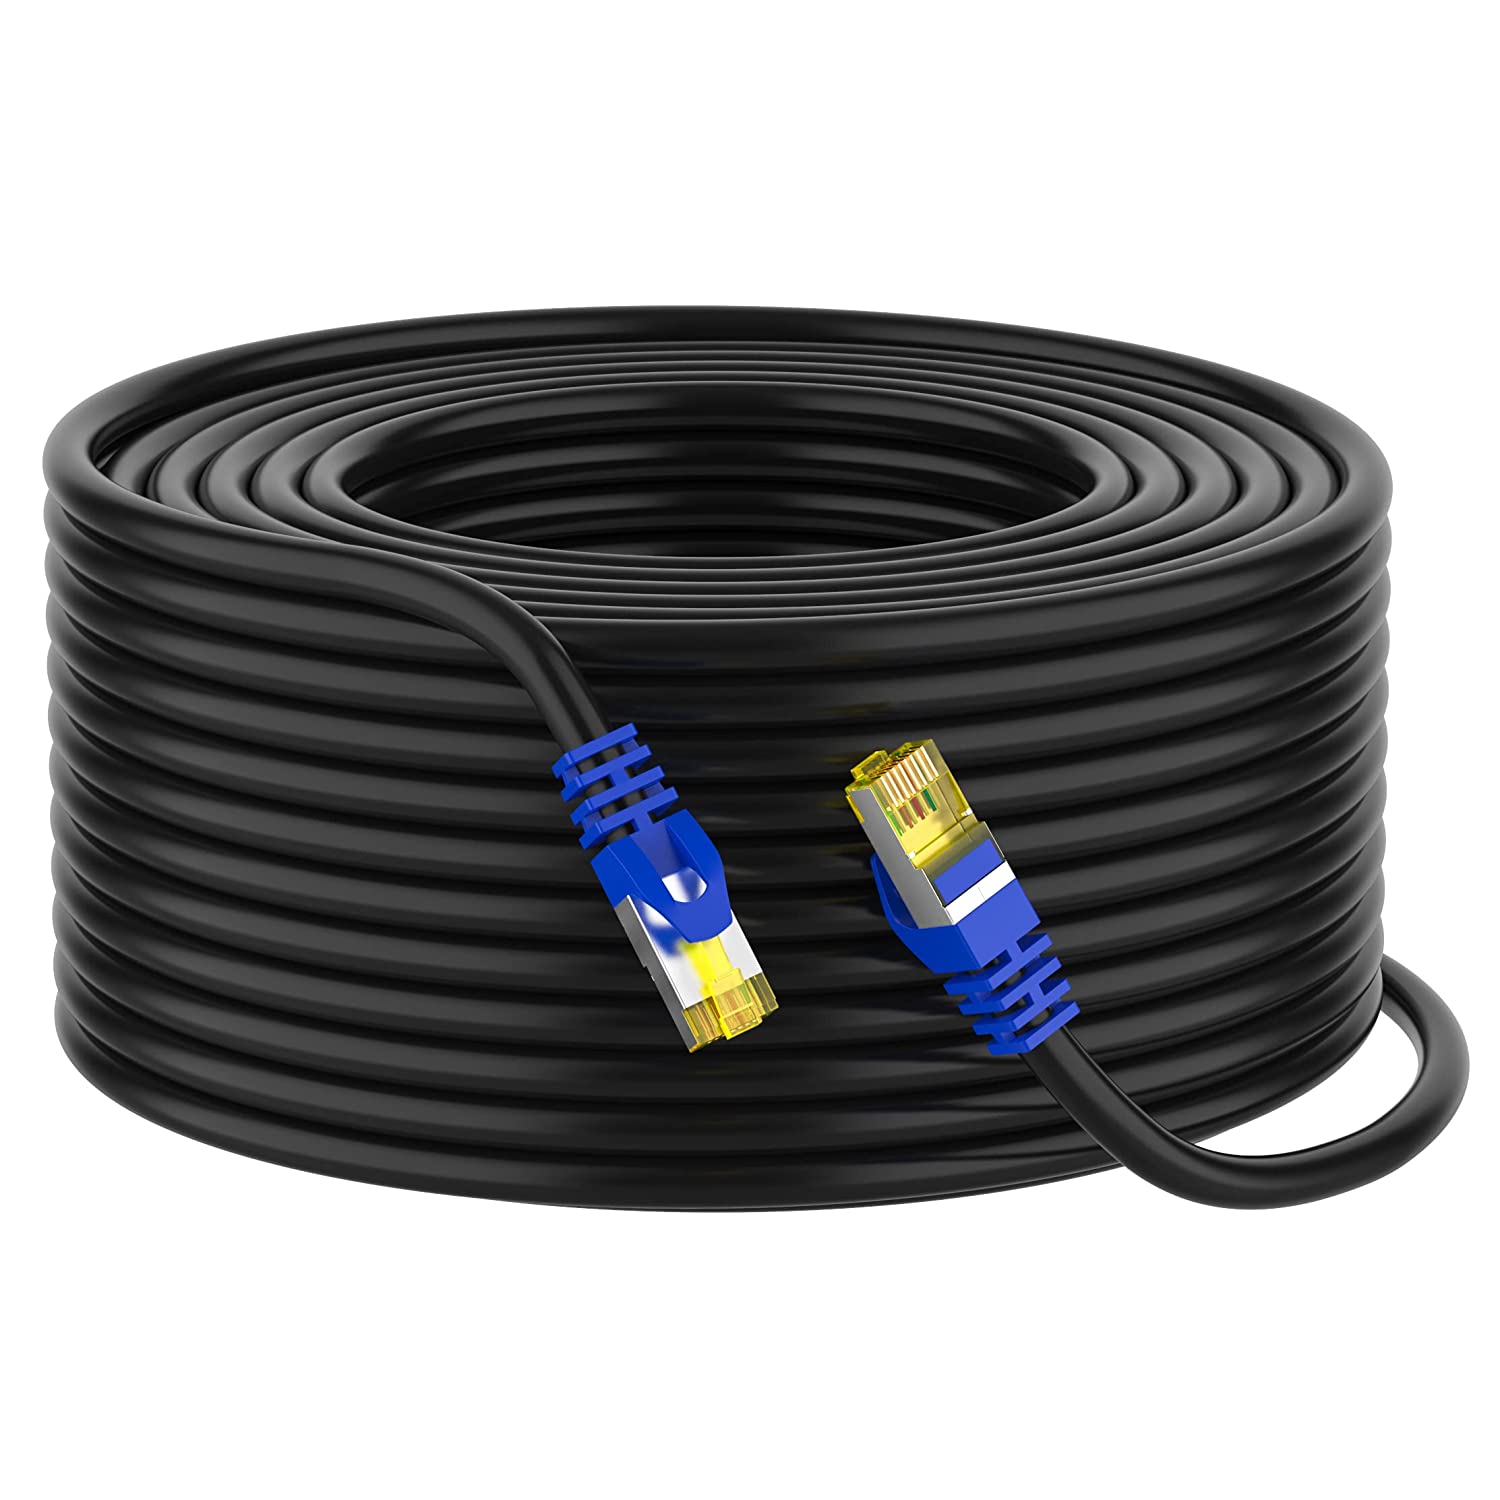 Outdoor Weatherproof Rated Cat.6 Shielded Bulk Cable - No Ends! Choose  Length in Feet!